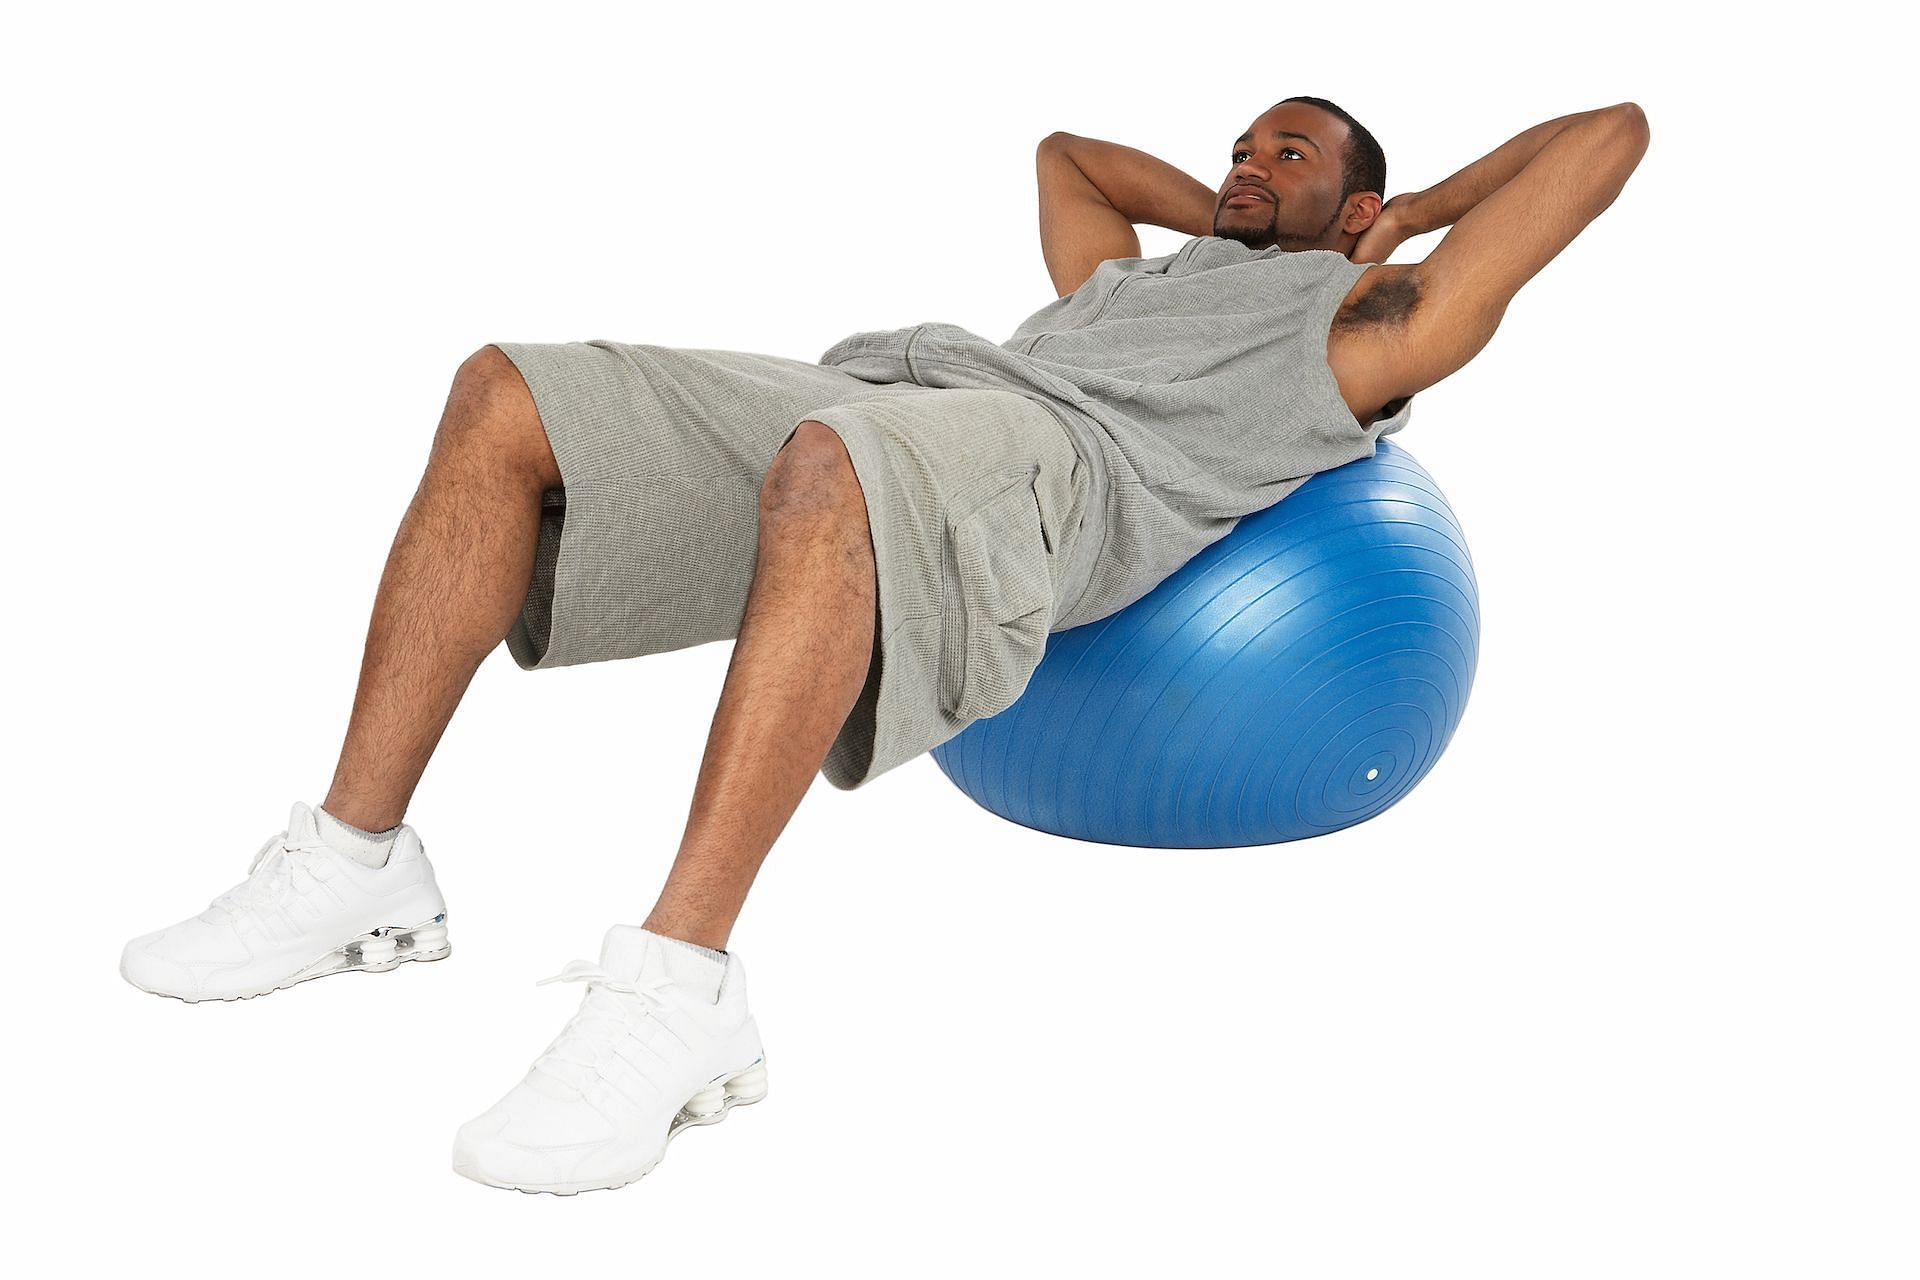 How safe is it to use fitness balls instead of chairs while working? (Image via Free Images/Photos.com)